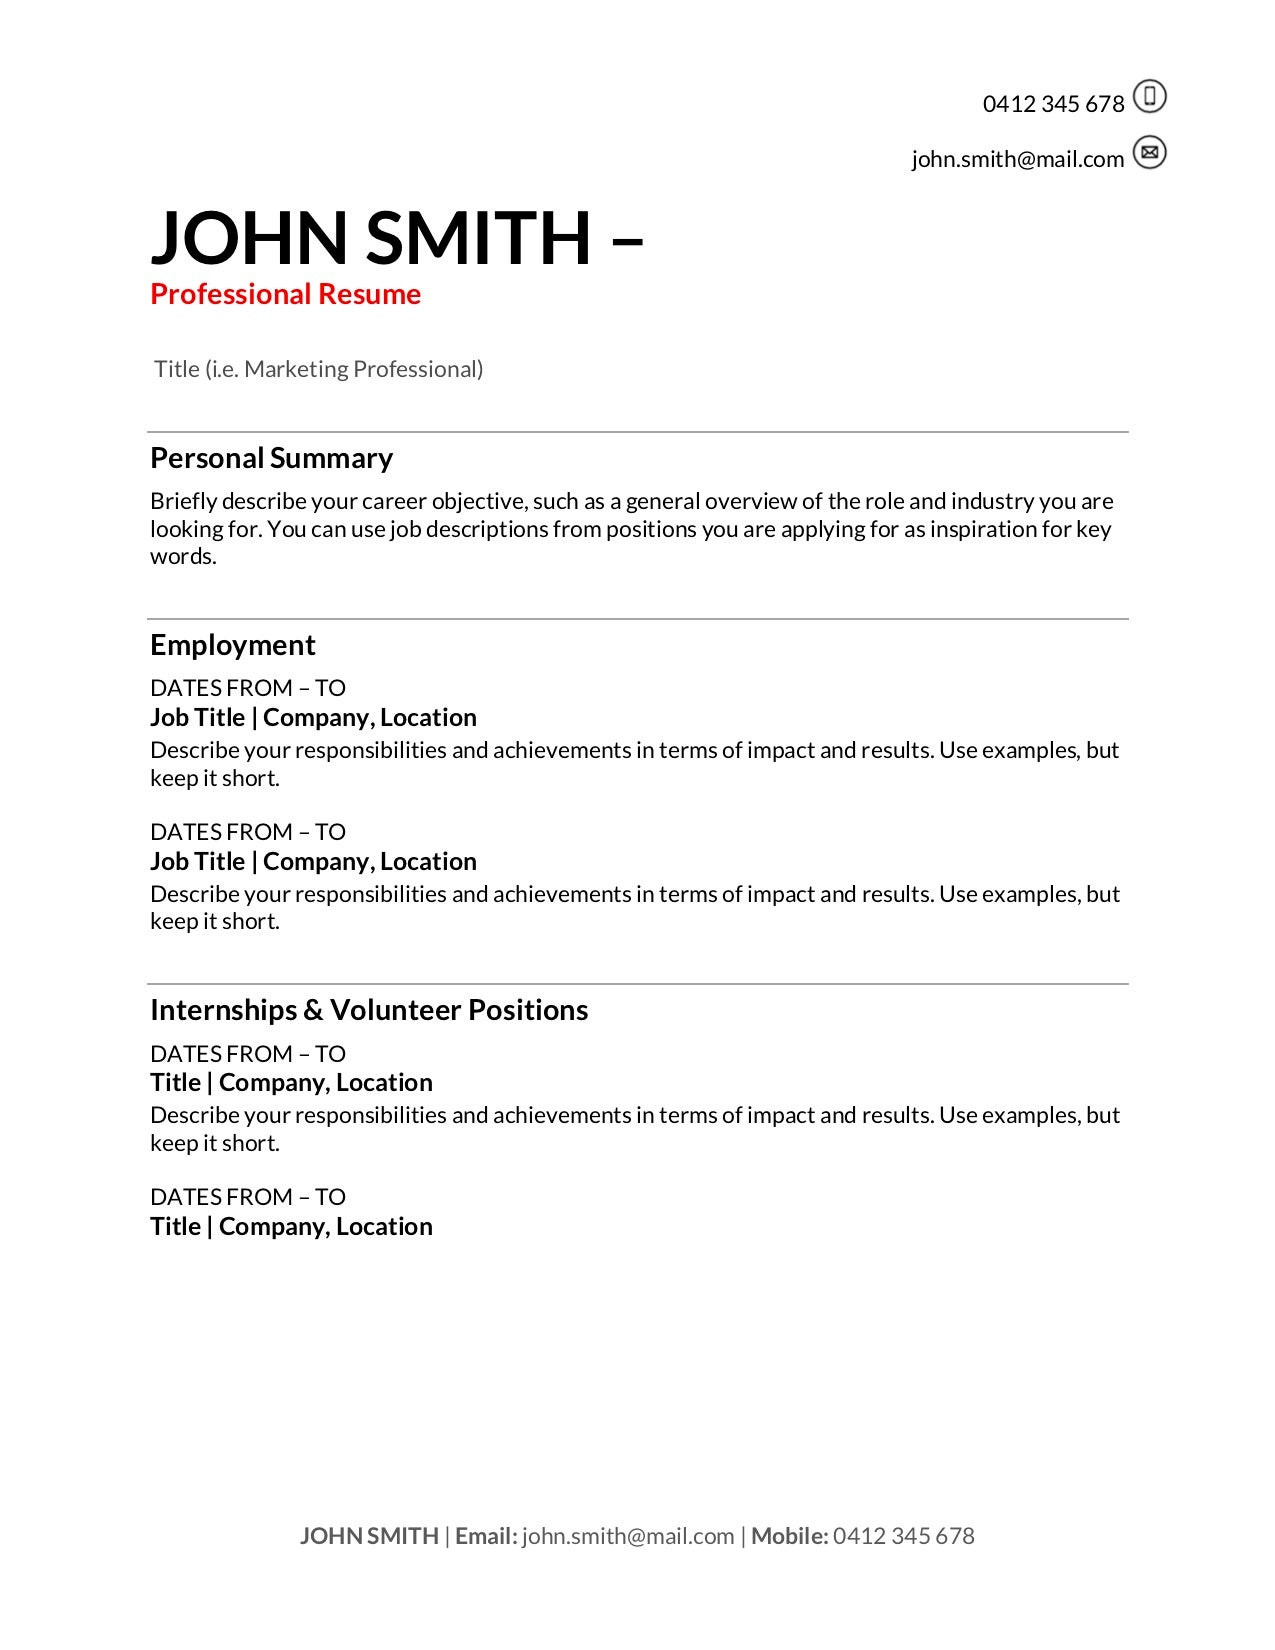 Sample Of Resume with Temporary Jobs Free Resume Templates [download]: How to Write A Resume In 2022 …